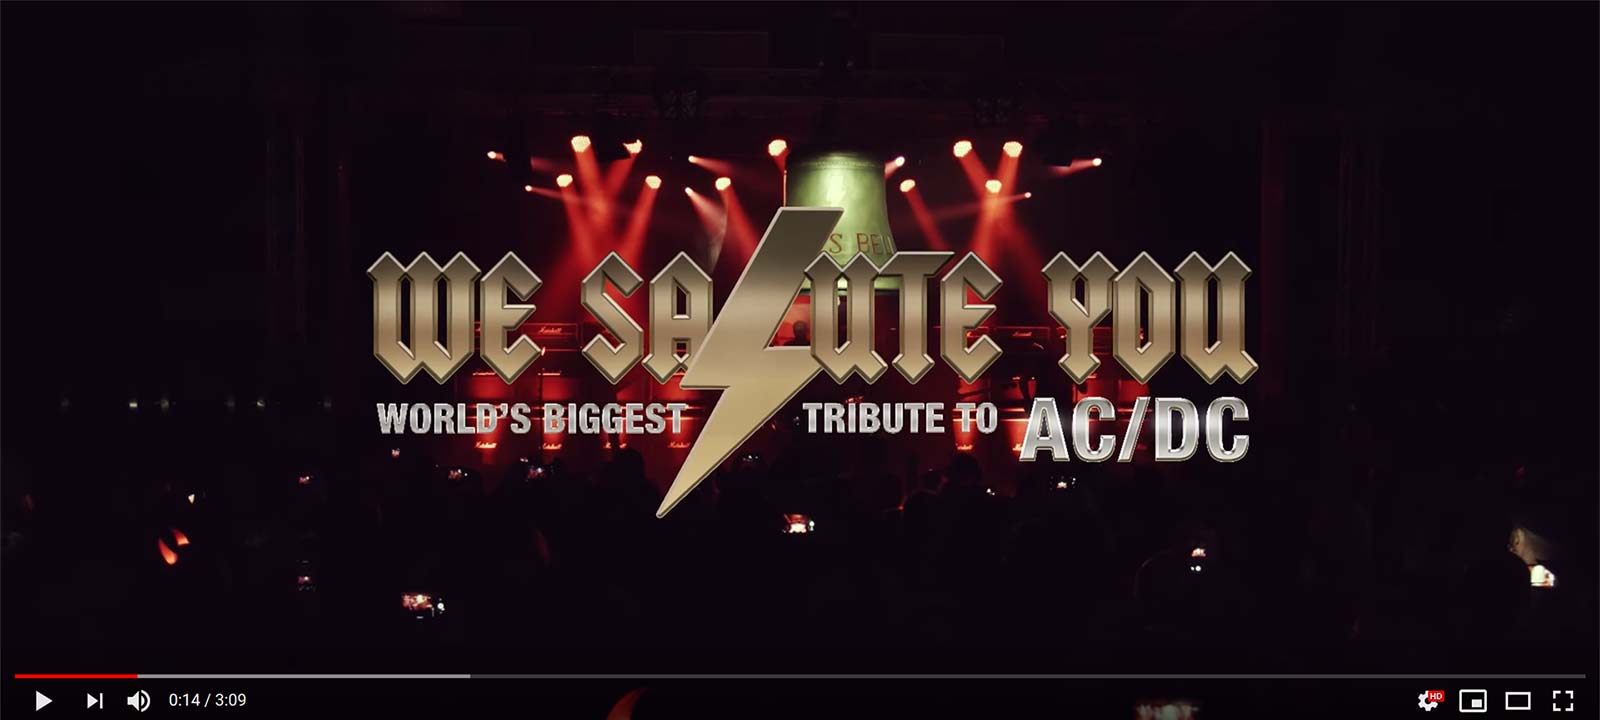 We Salute You | World's Biggest Tribute to AC/DC